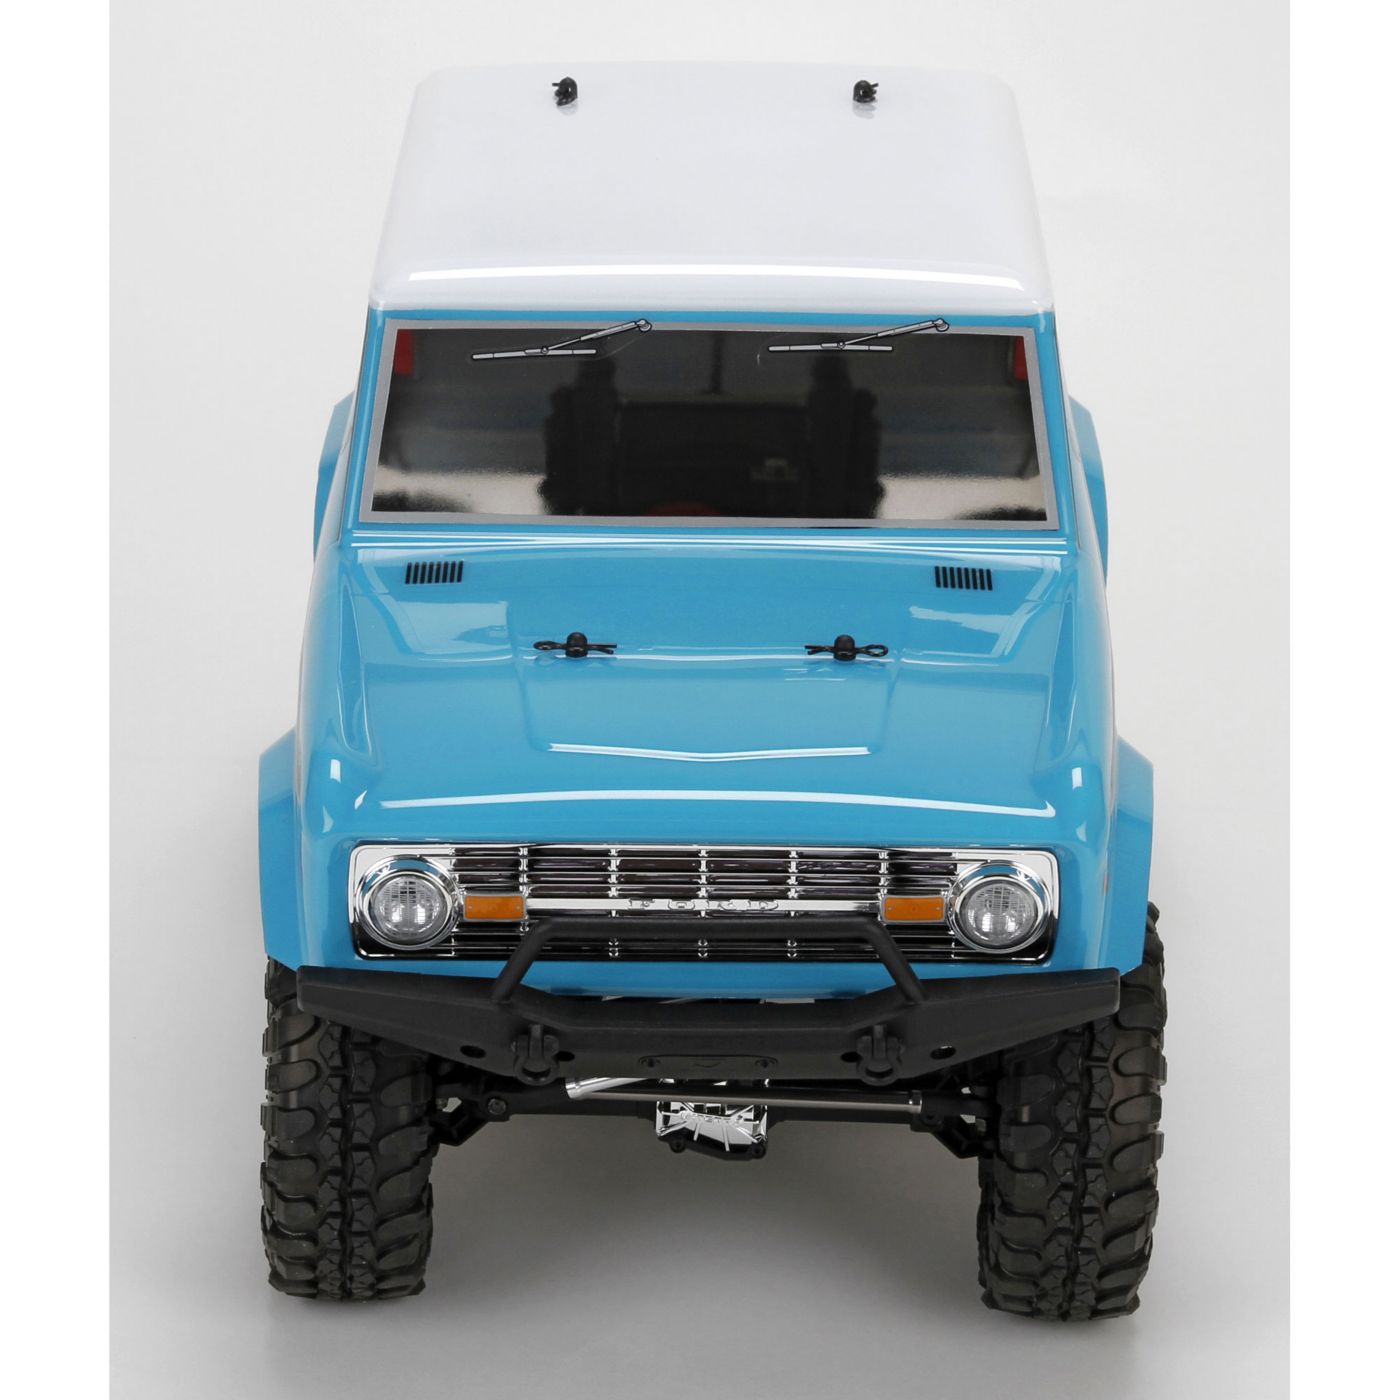 Car Ford Bronco 1972 1:10 Scale